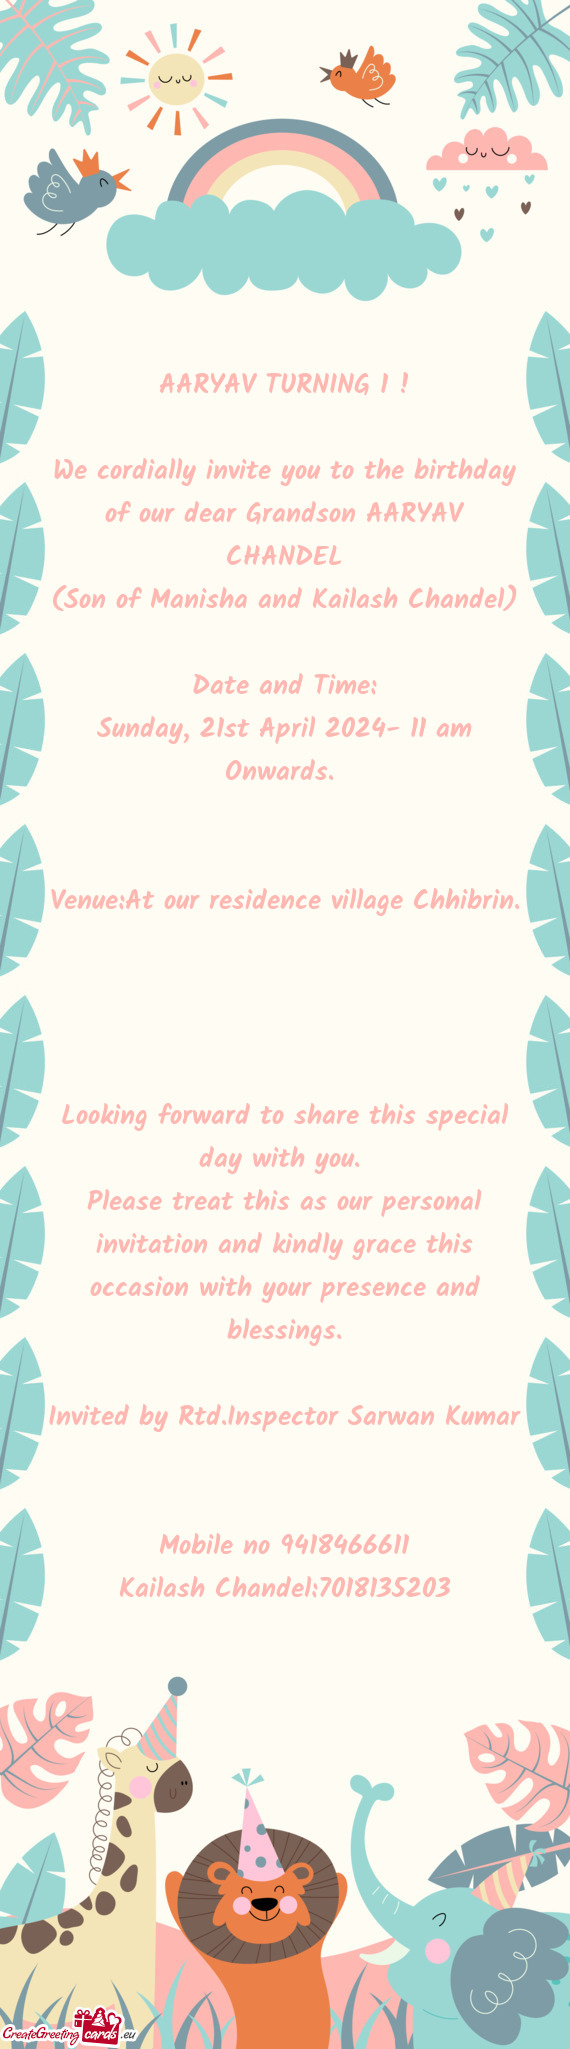 Venue:At our residence village Chhibrin